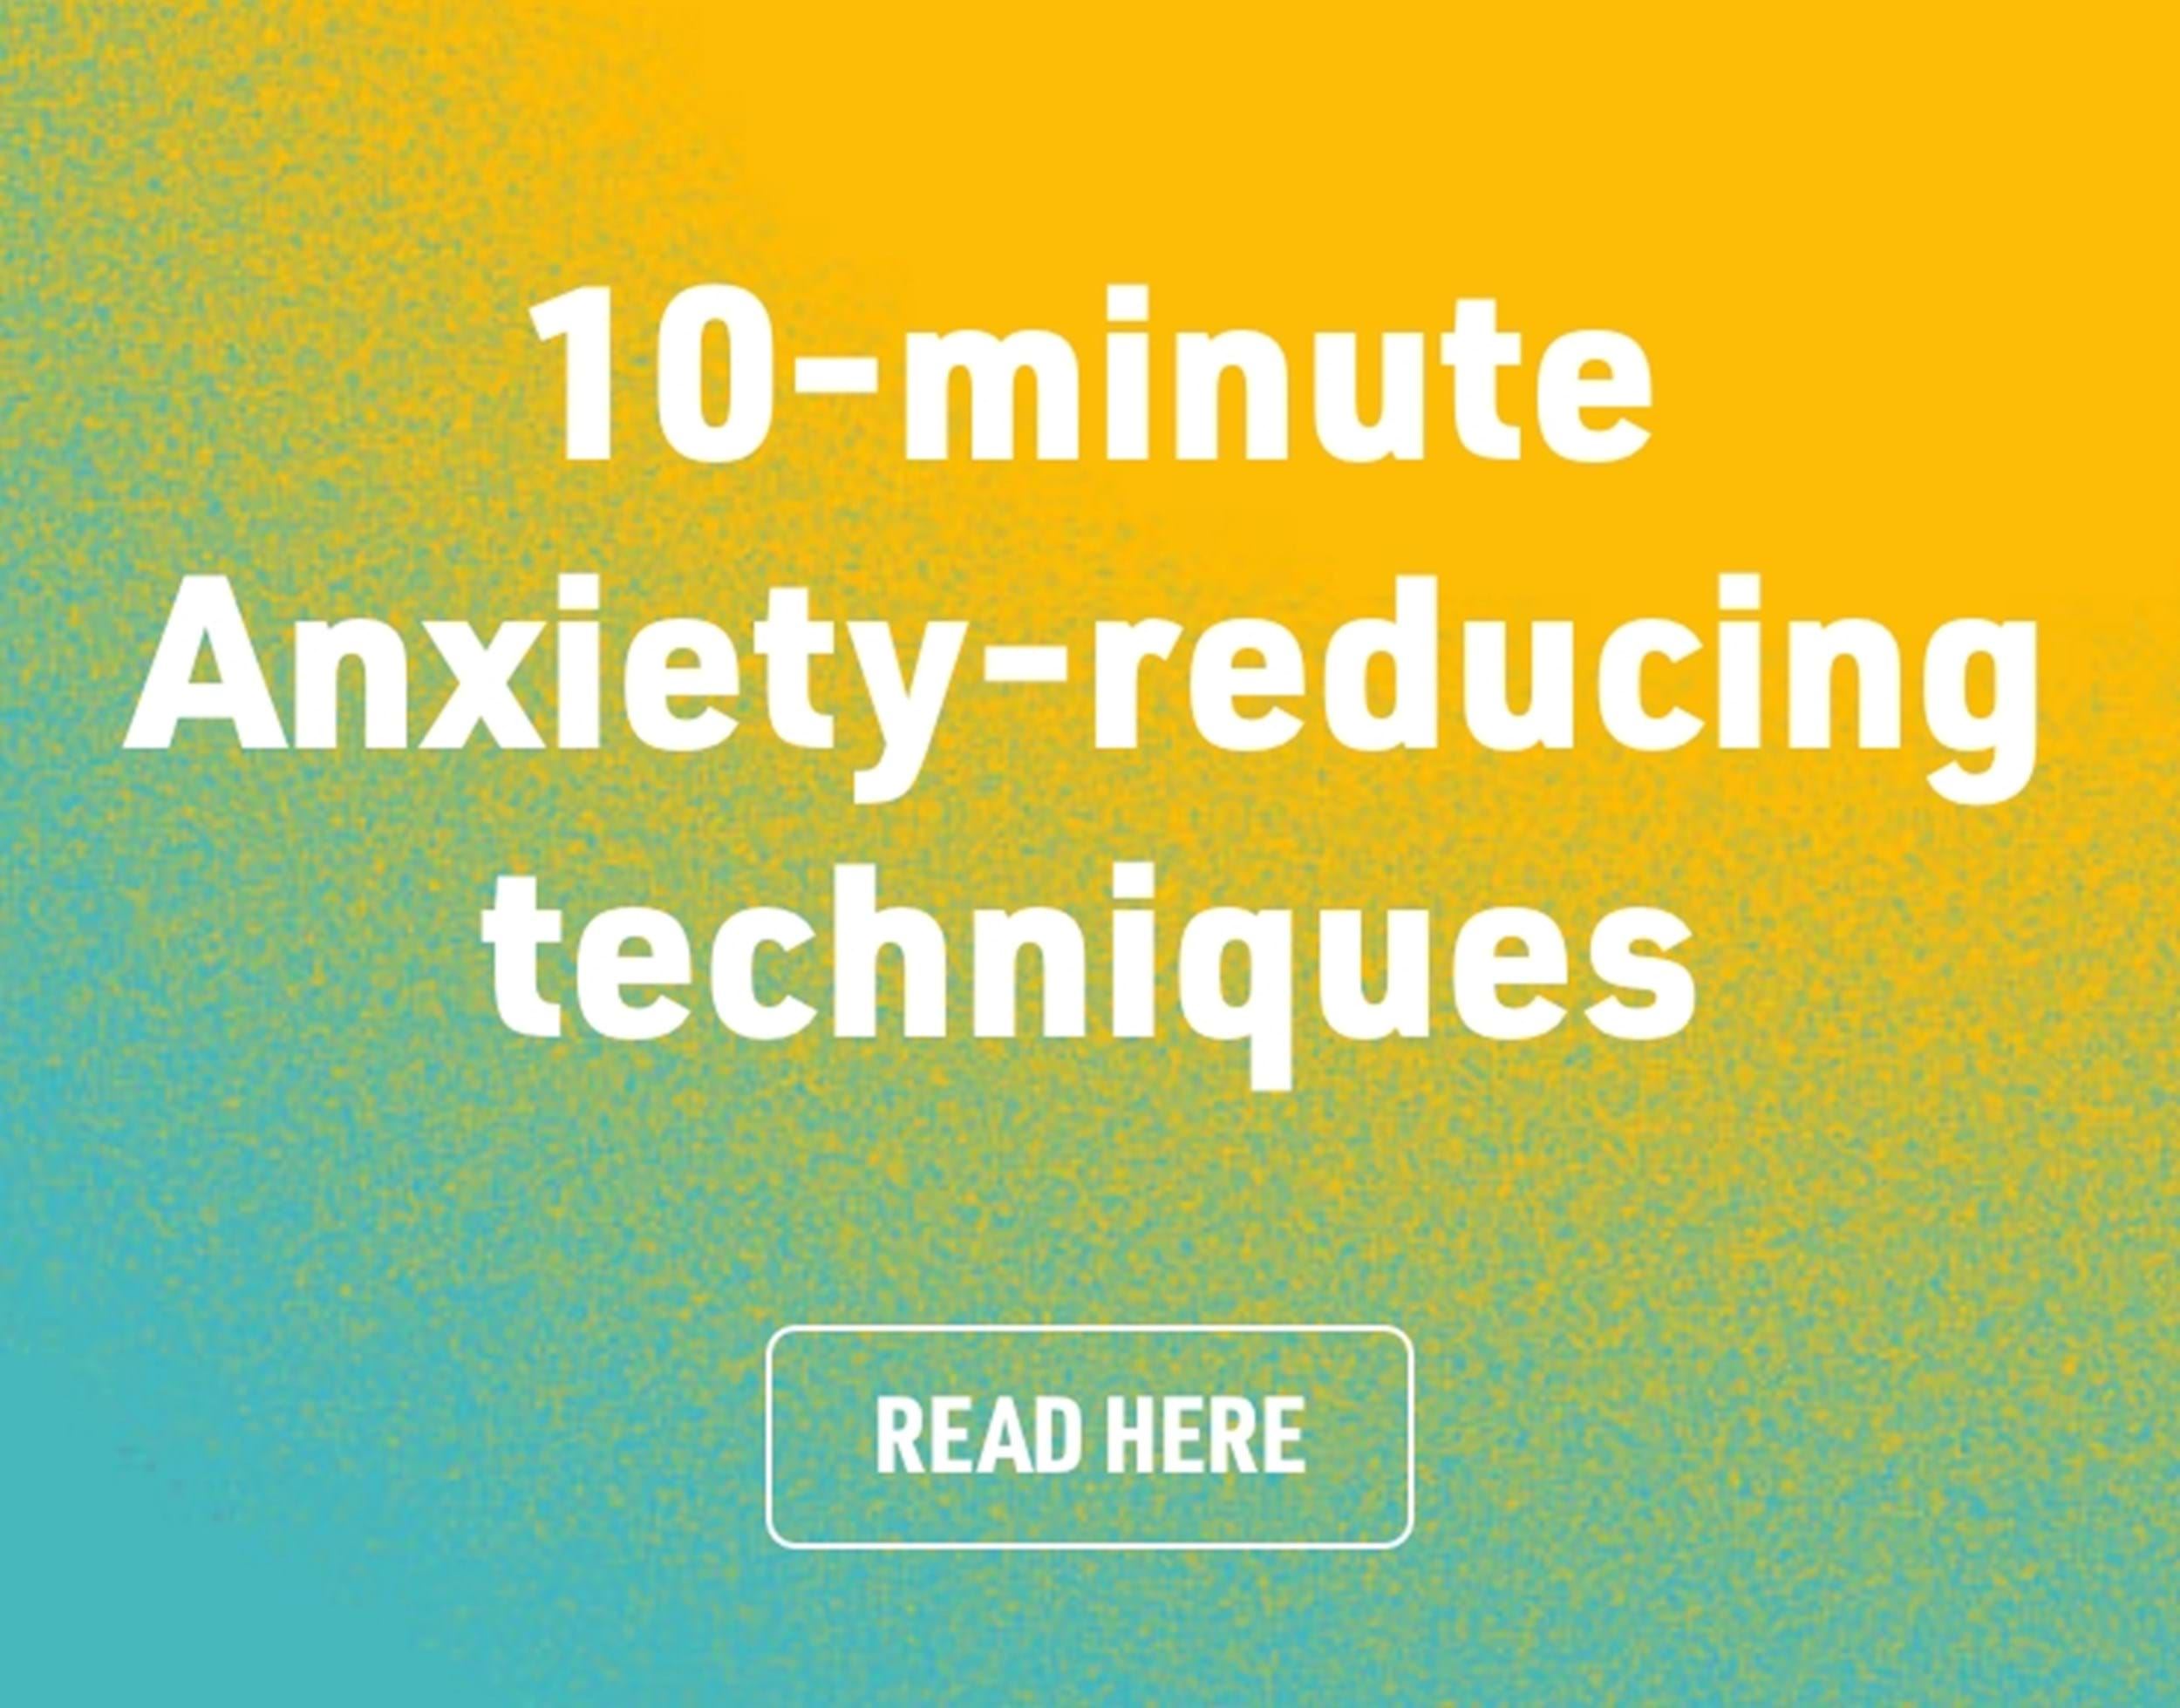 10-minute anxiety-reducing techniques